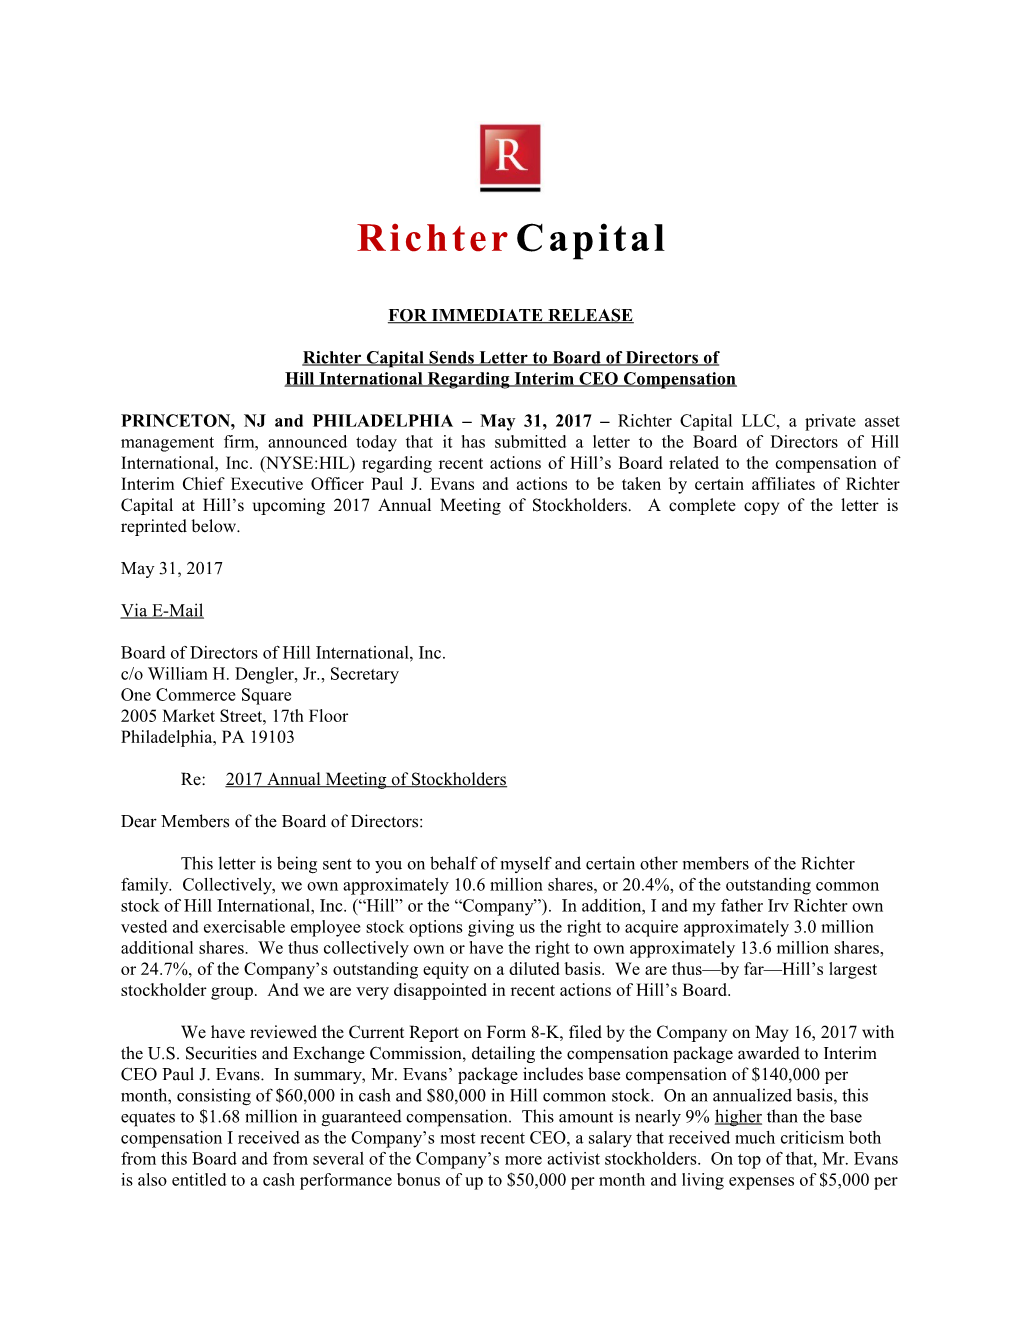 Richter Capital Sends Letter to Board of Directors Of